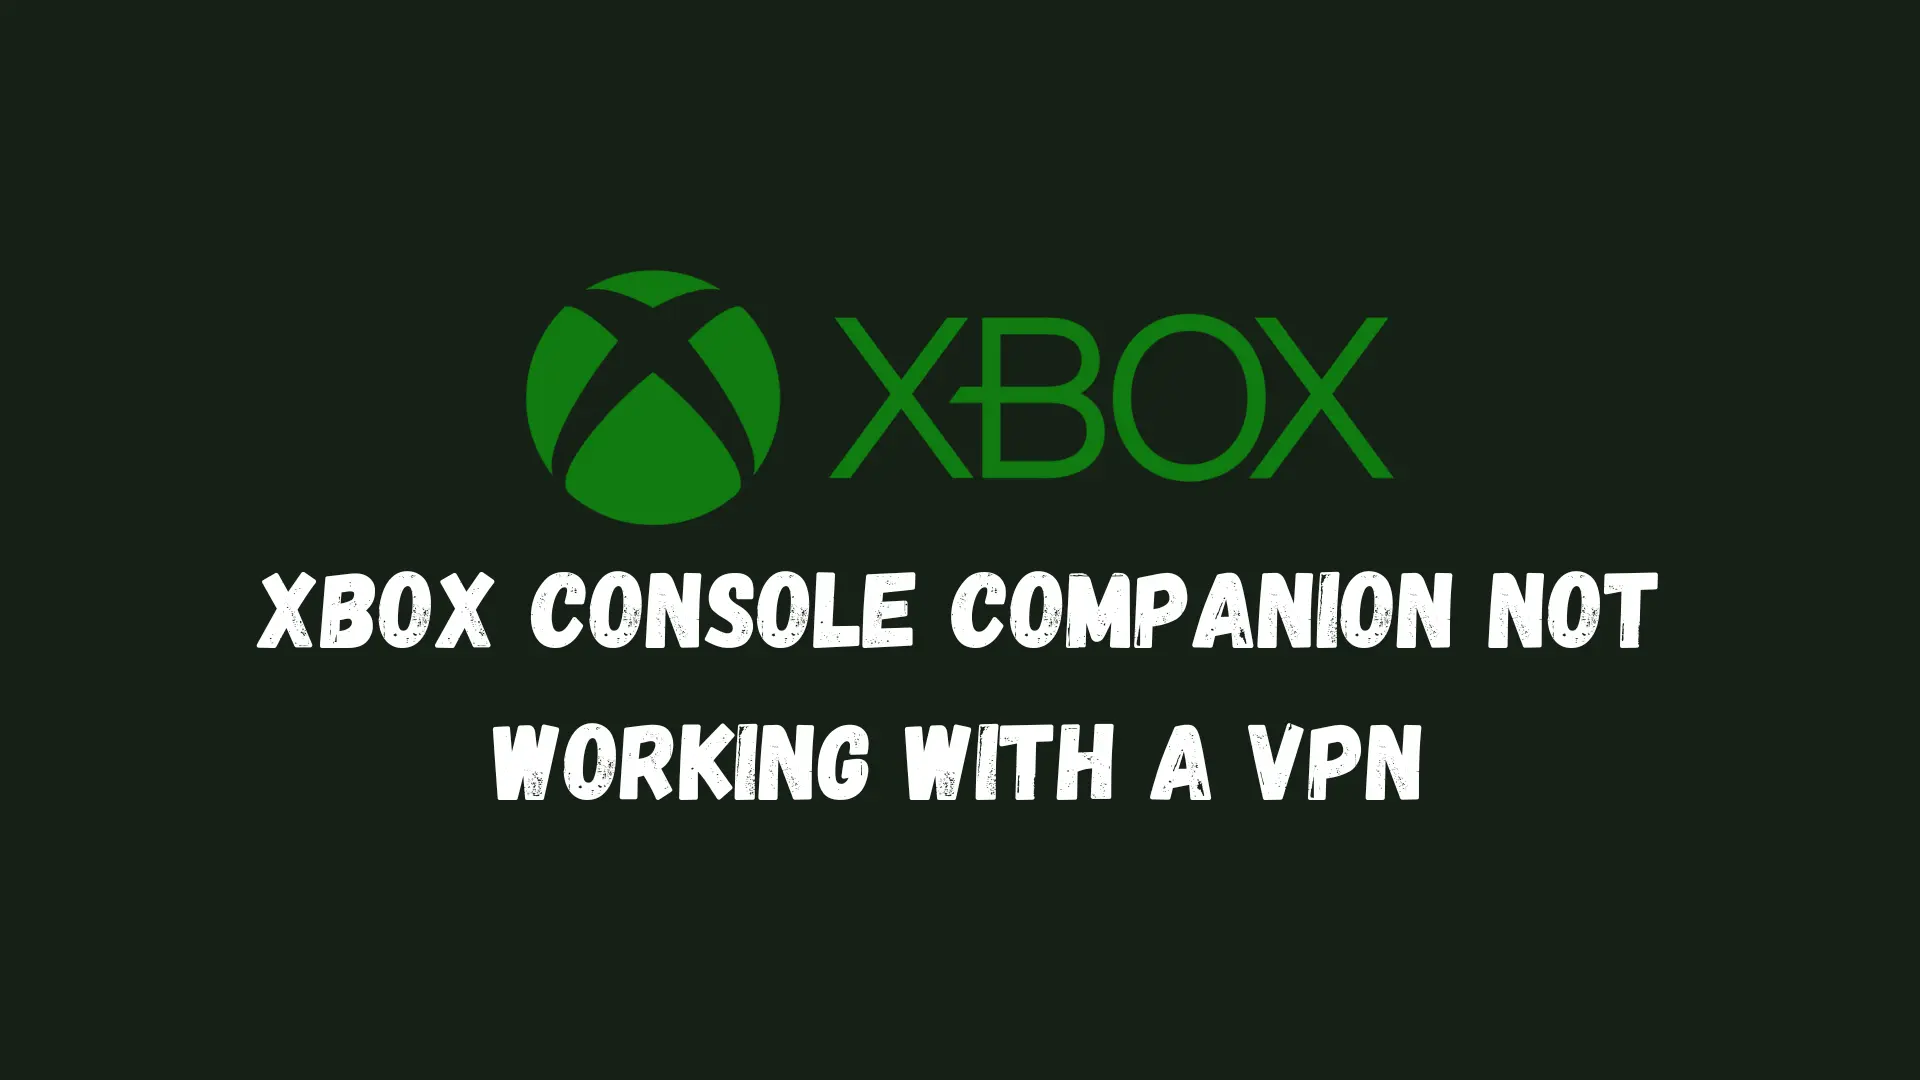 Xbox Console Companion Not Working with a VPN